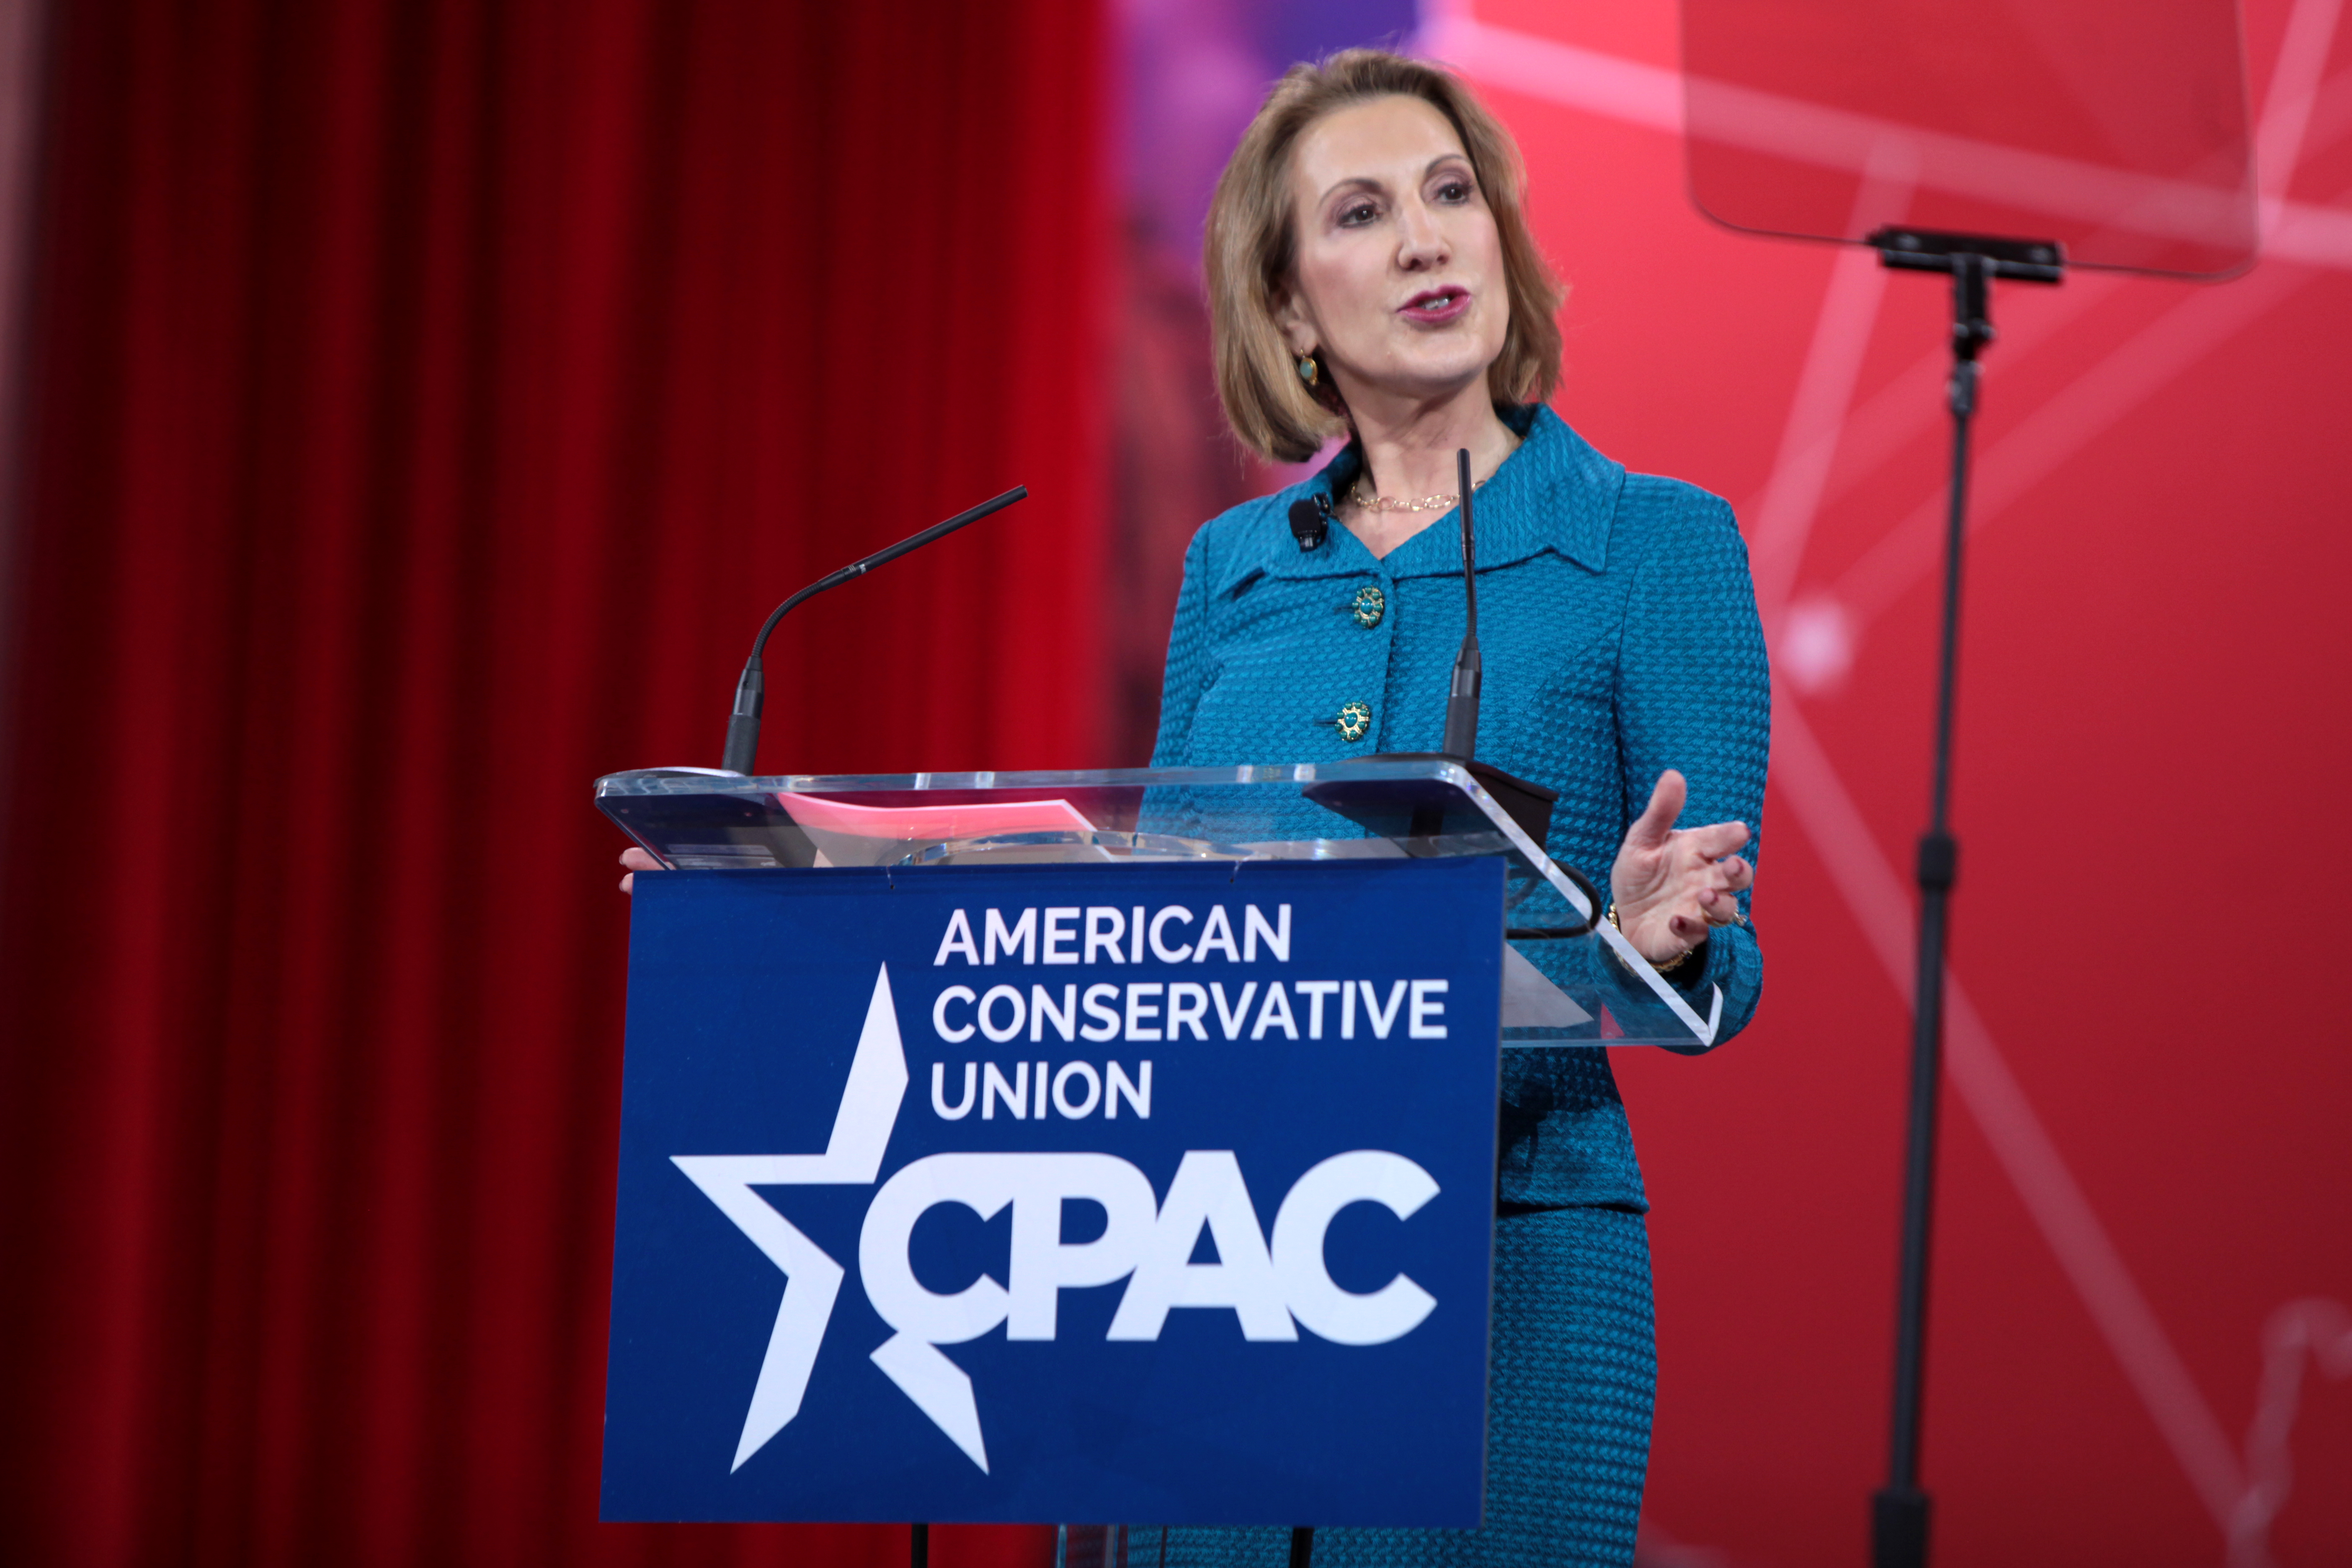 Carly Fiorina speaking at CPAC